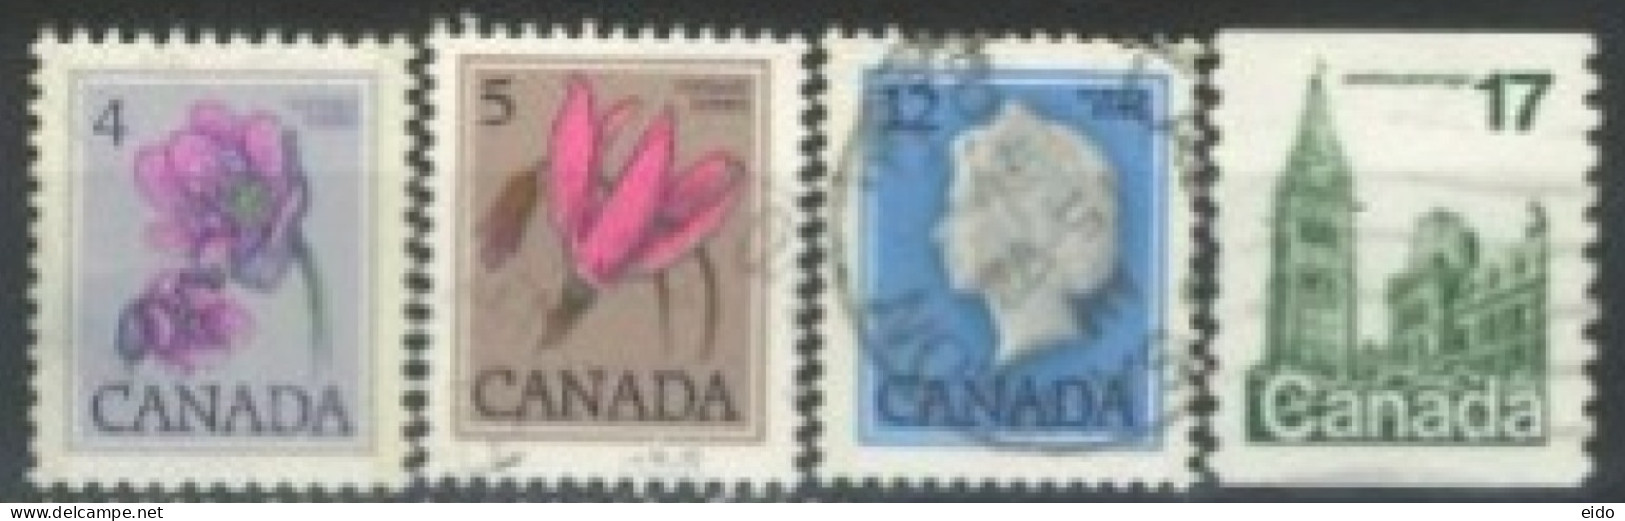 CANADA - 1977, QUEEN ELIZABETH II, FLOWERS & HOUSE OF PARLIAMENTSTAMPS SET OF 4, USED. - Oblitérés